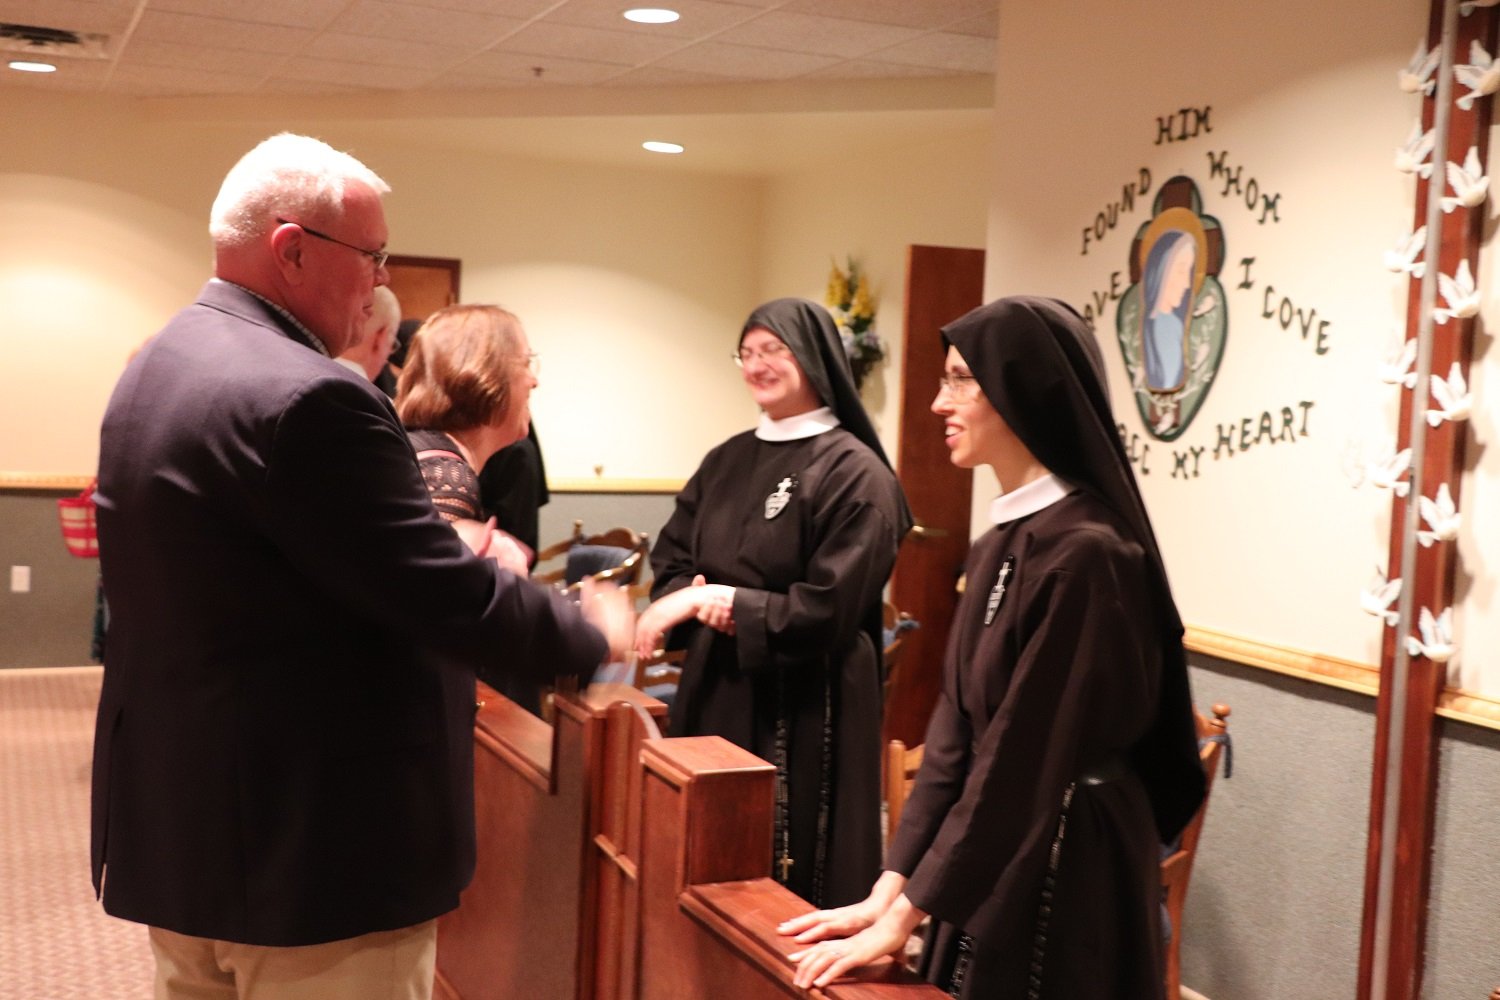  Sisters Mary Andrea and Miriam Esther speak with Postulant Hannah’s parents, Joe and Cathy 